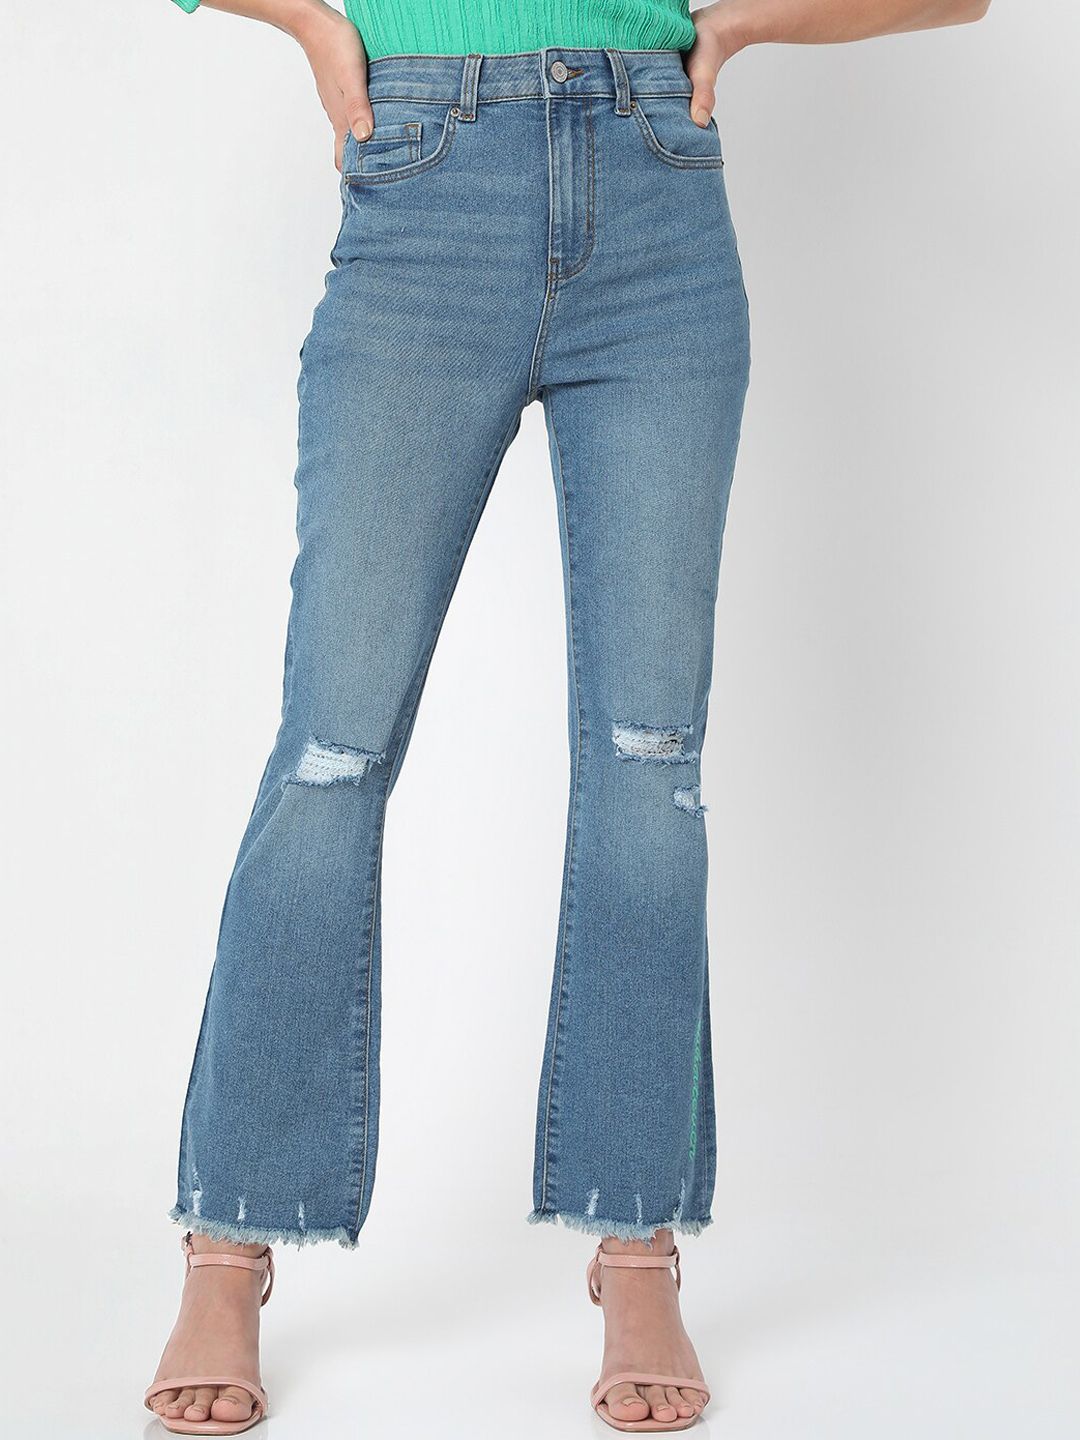 Vero Moda Women Blue Bootcut High-Rise Highly Distressed Light Fade Jeans Price in India